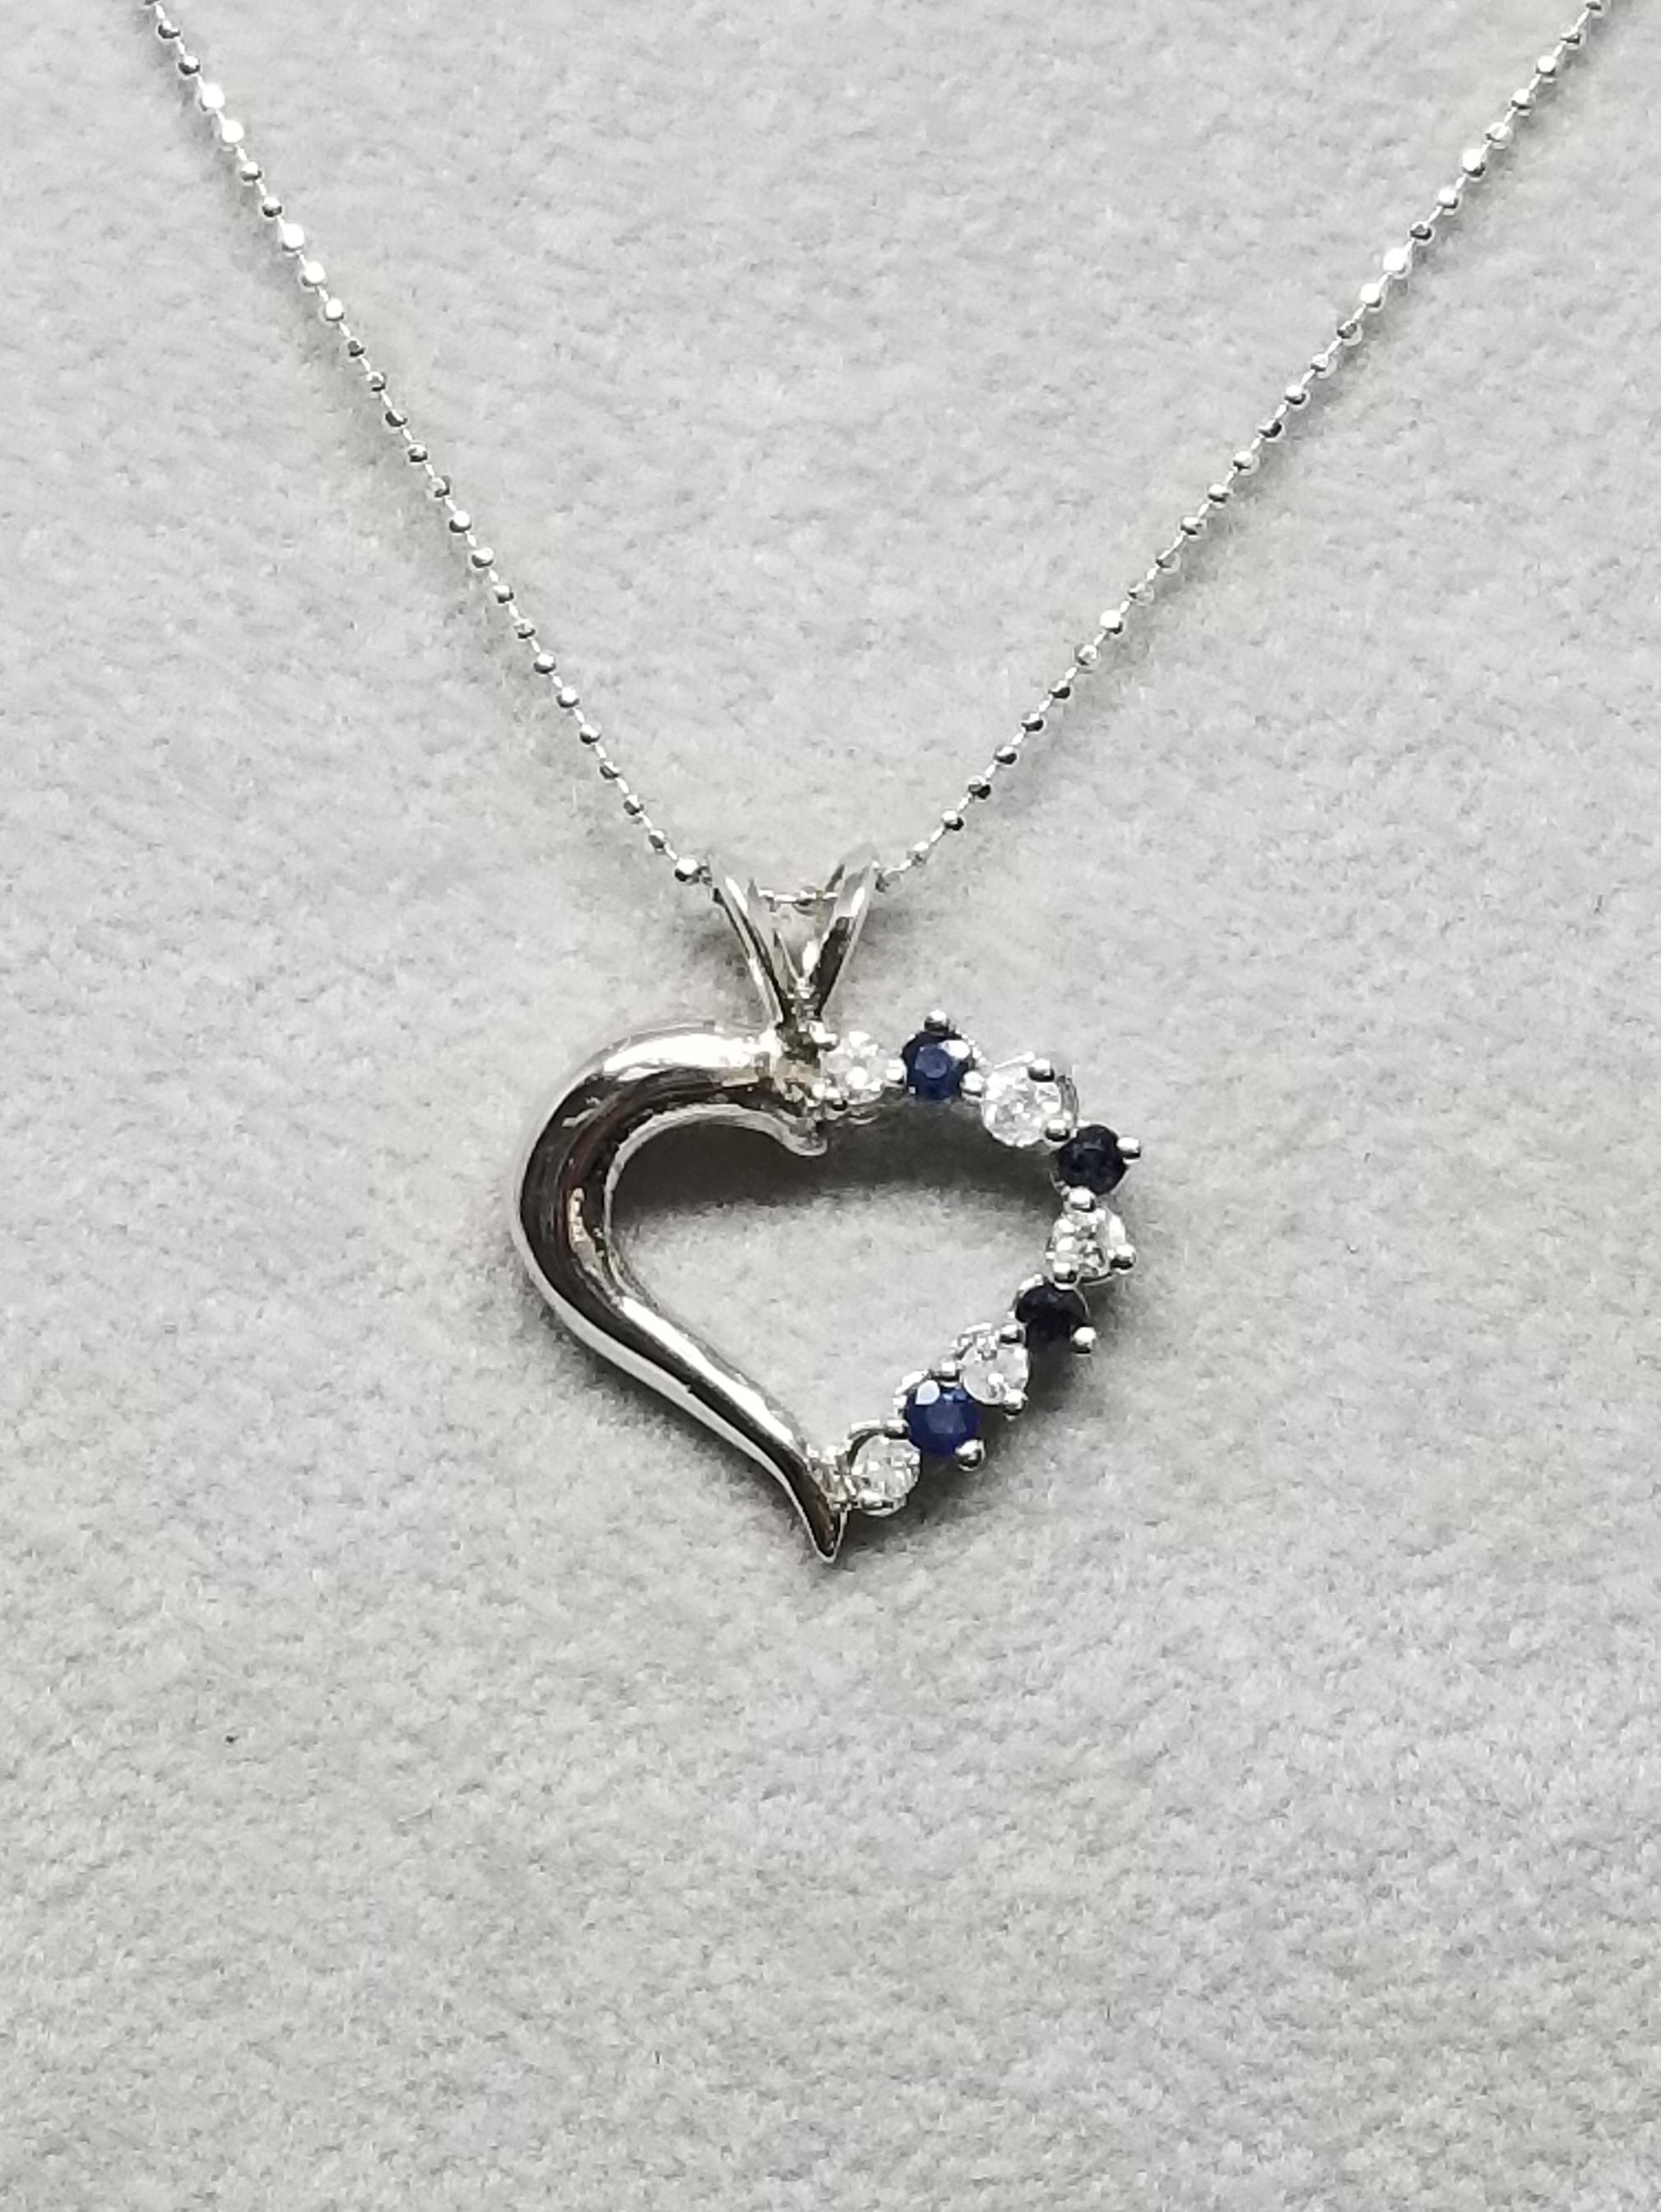 14k white gold diamond and sapphire containing 5 round full cut diamonds of very fine quality weighing .20pts. and 4 round sapphires weighing .30pts. on a 16 inch chain.